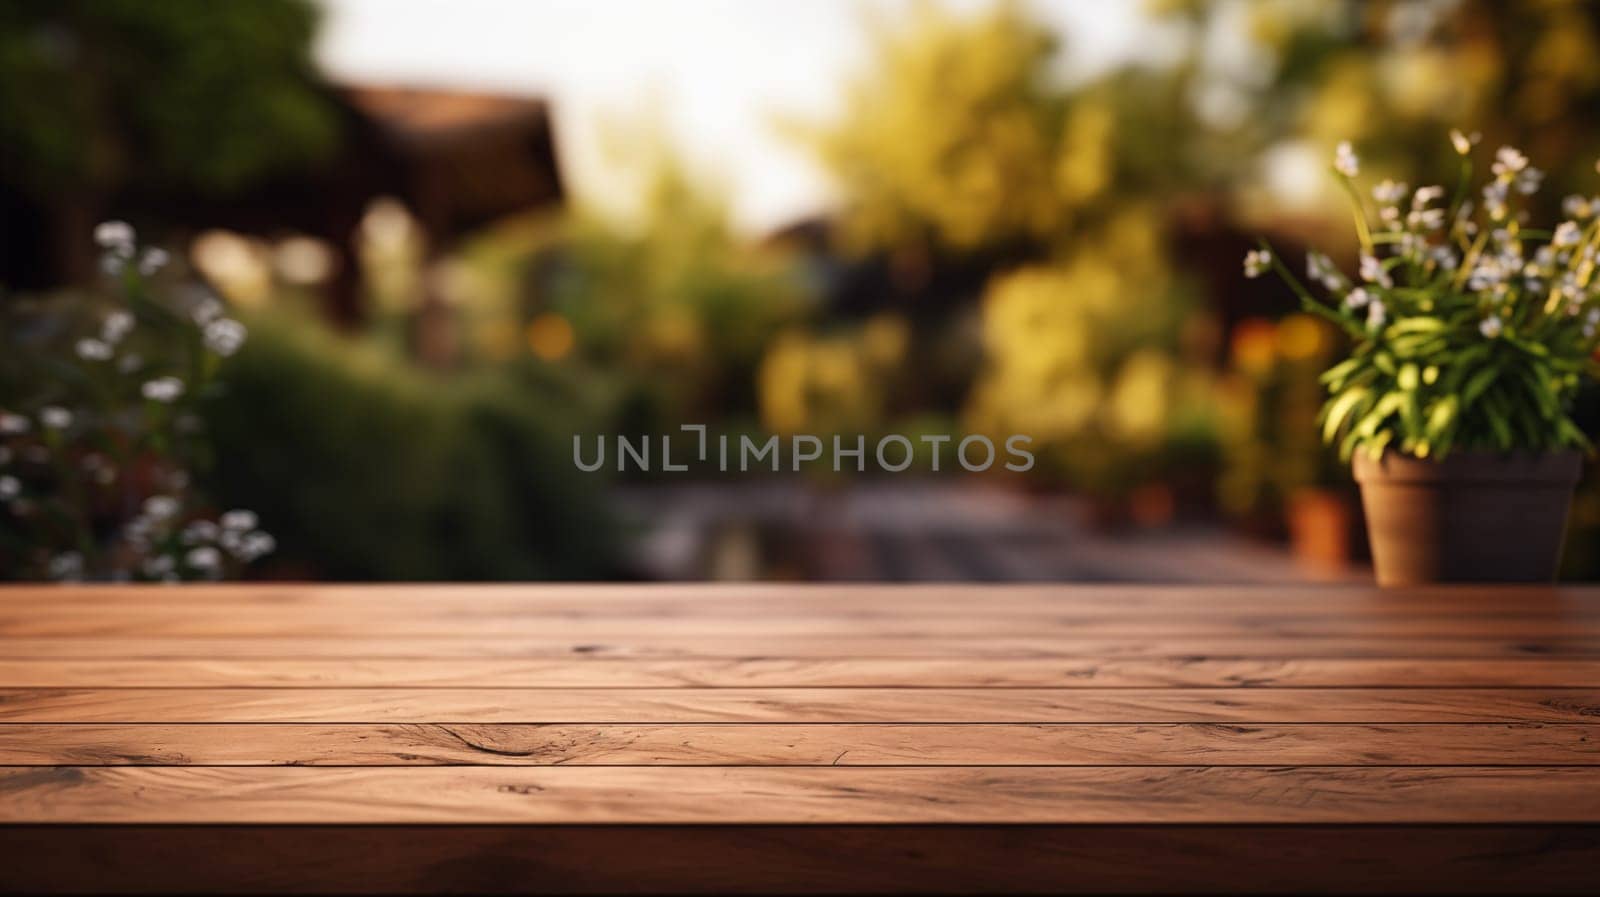 Warm wooden surface with a soft-focus garden and potted plants in the background. Place for your product